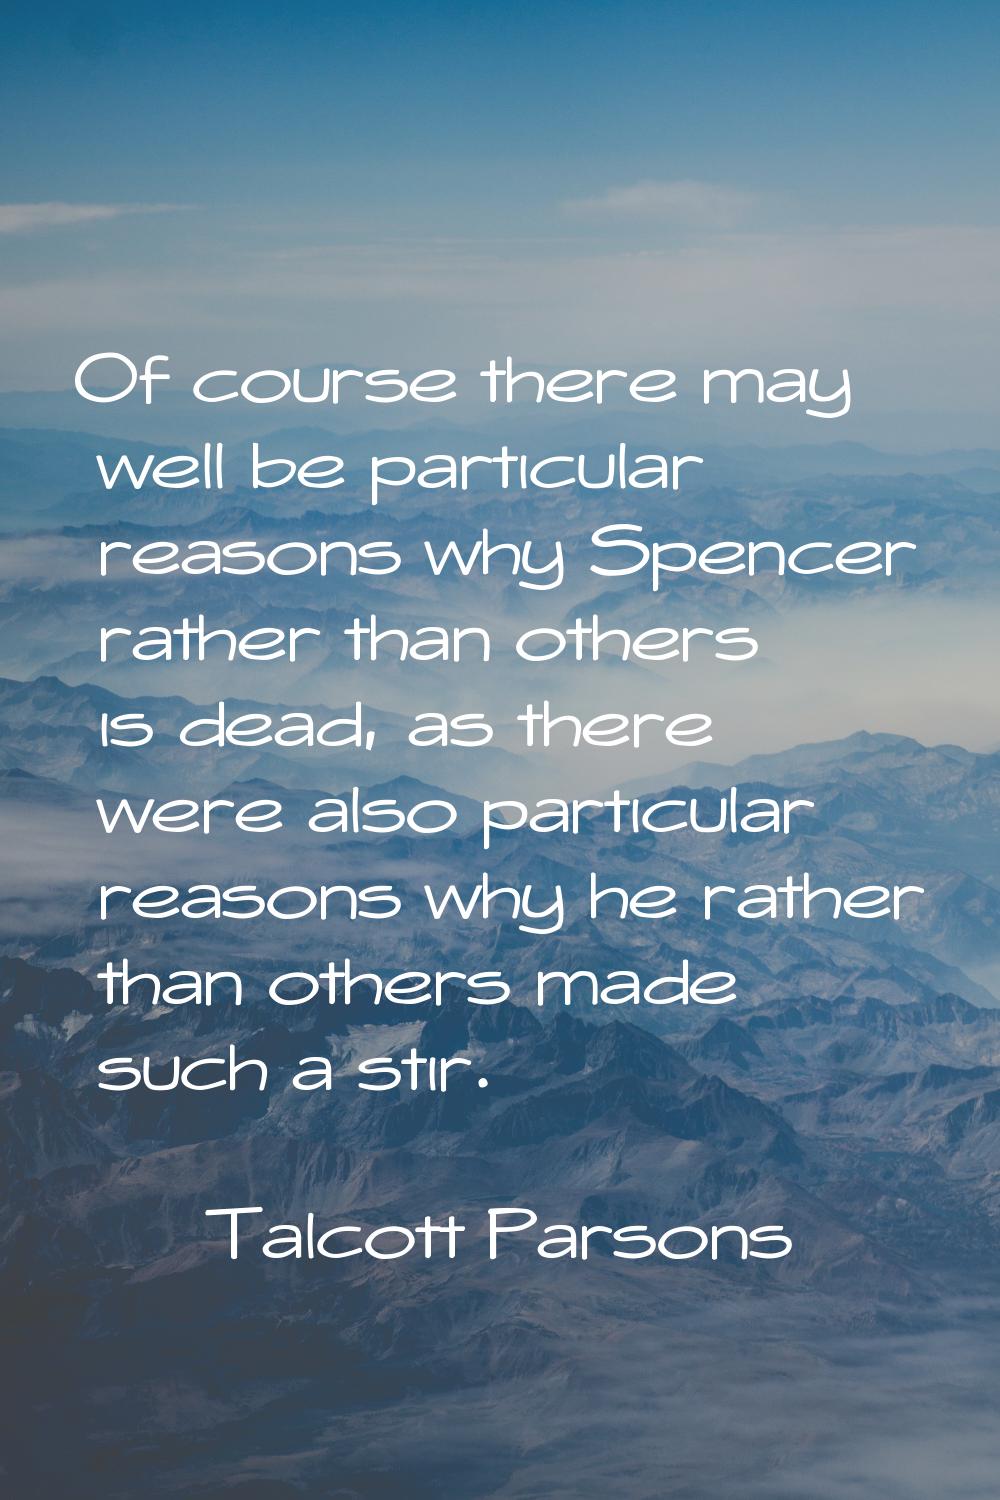 Of course there may well be particular reasons why Spencer rather than others is dead, as there wer